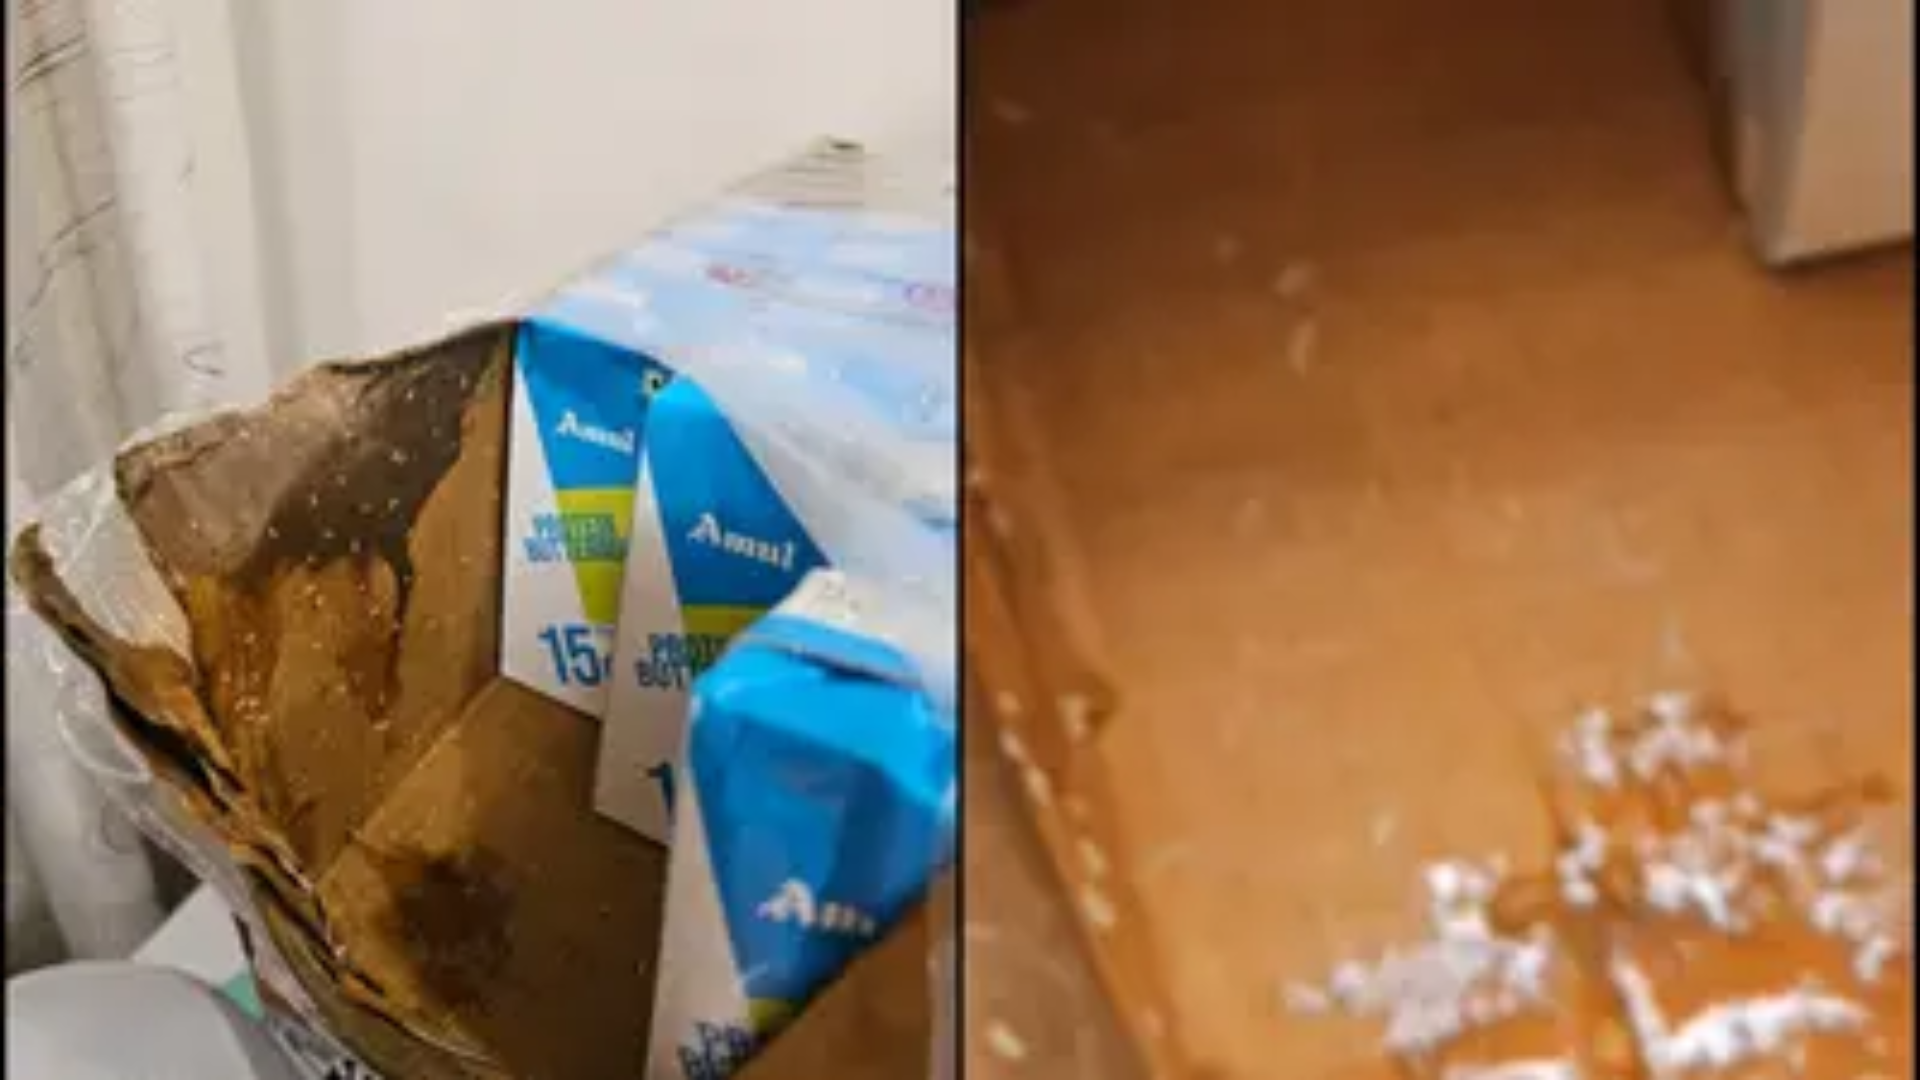 Man Finds Live Worms in Amul Buttermilk Ordered Online, Sparks Industry Concern